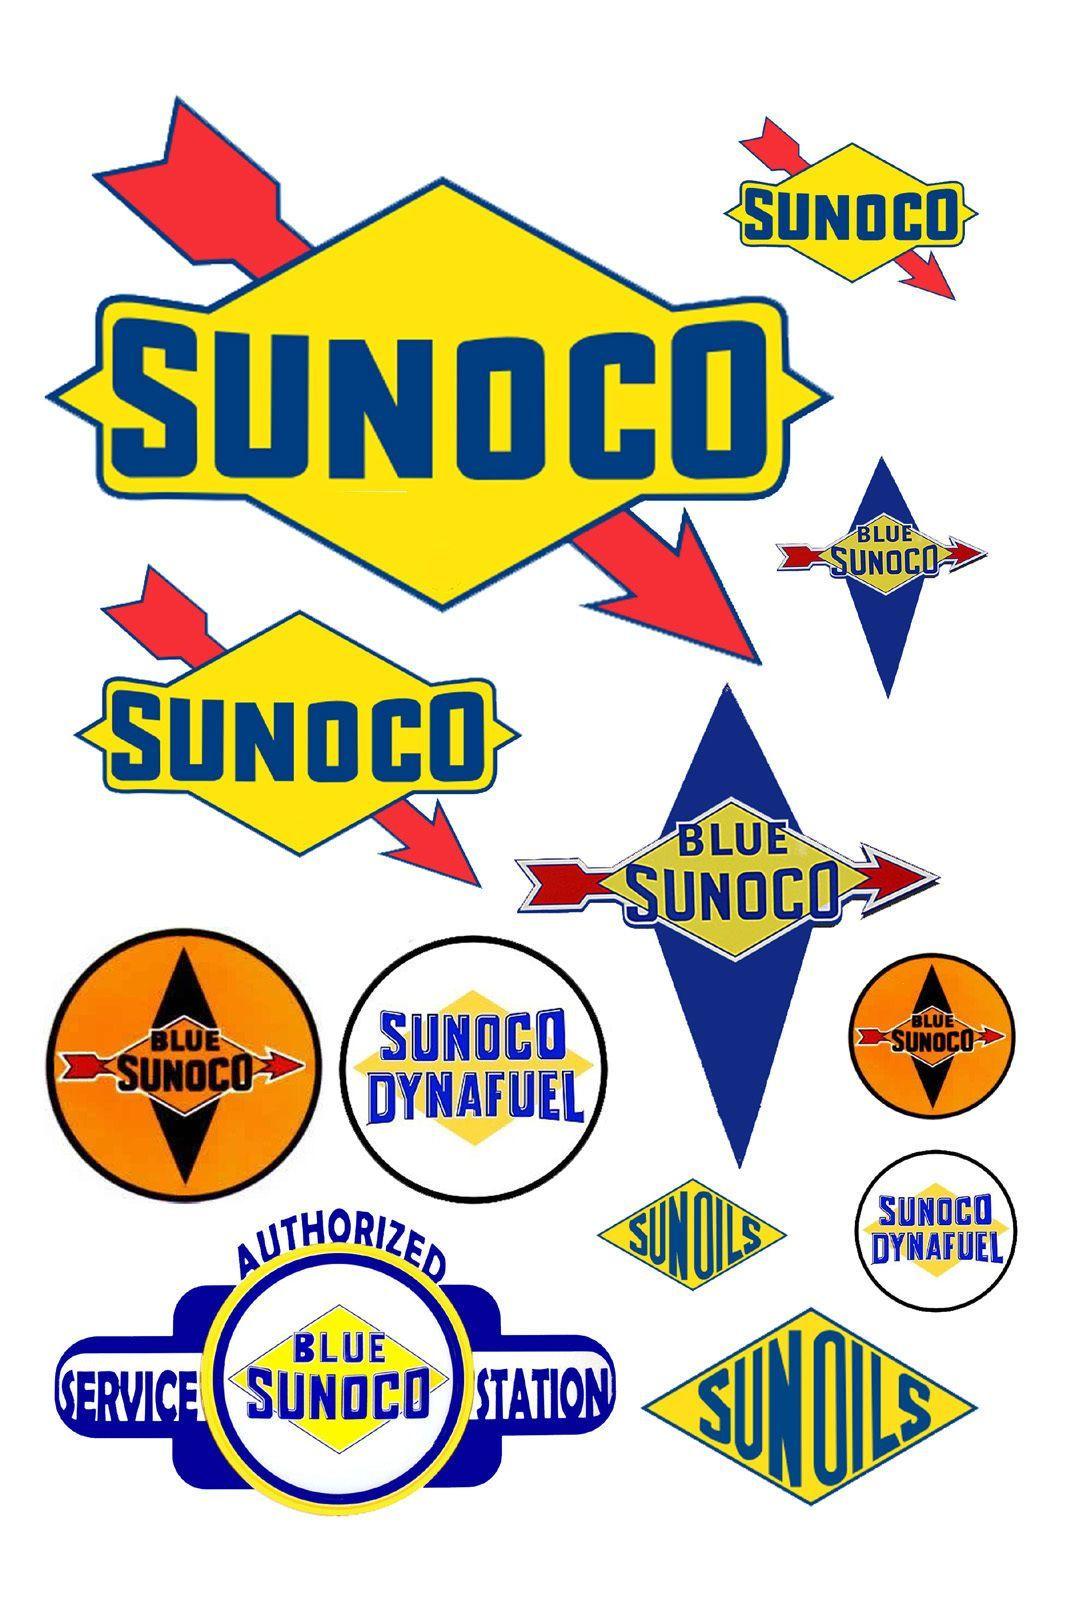 Sunoco Gas Station Logo - 1:25 G scale Sunoco gas station signs. Signage and printables